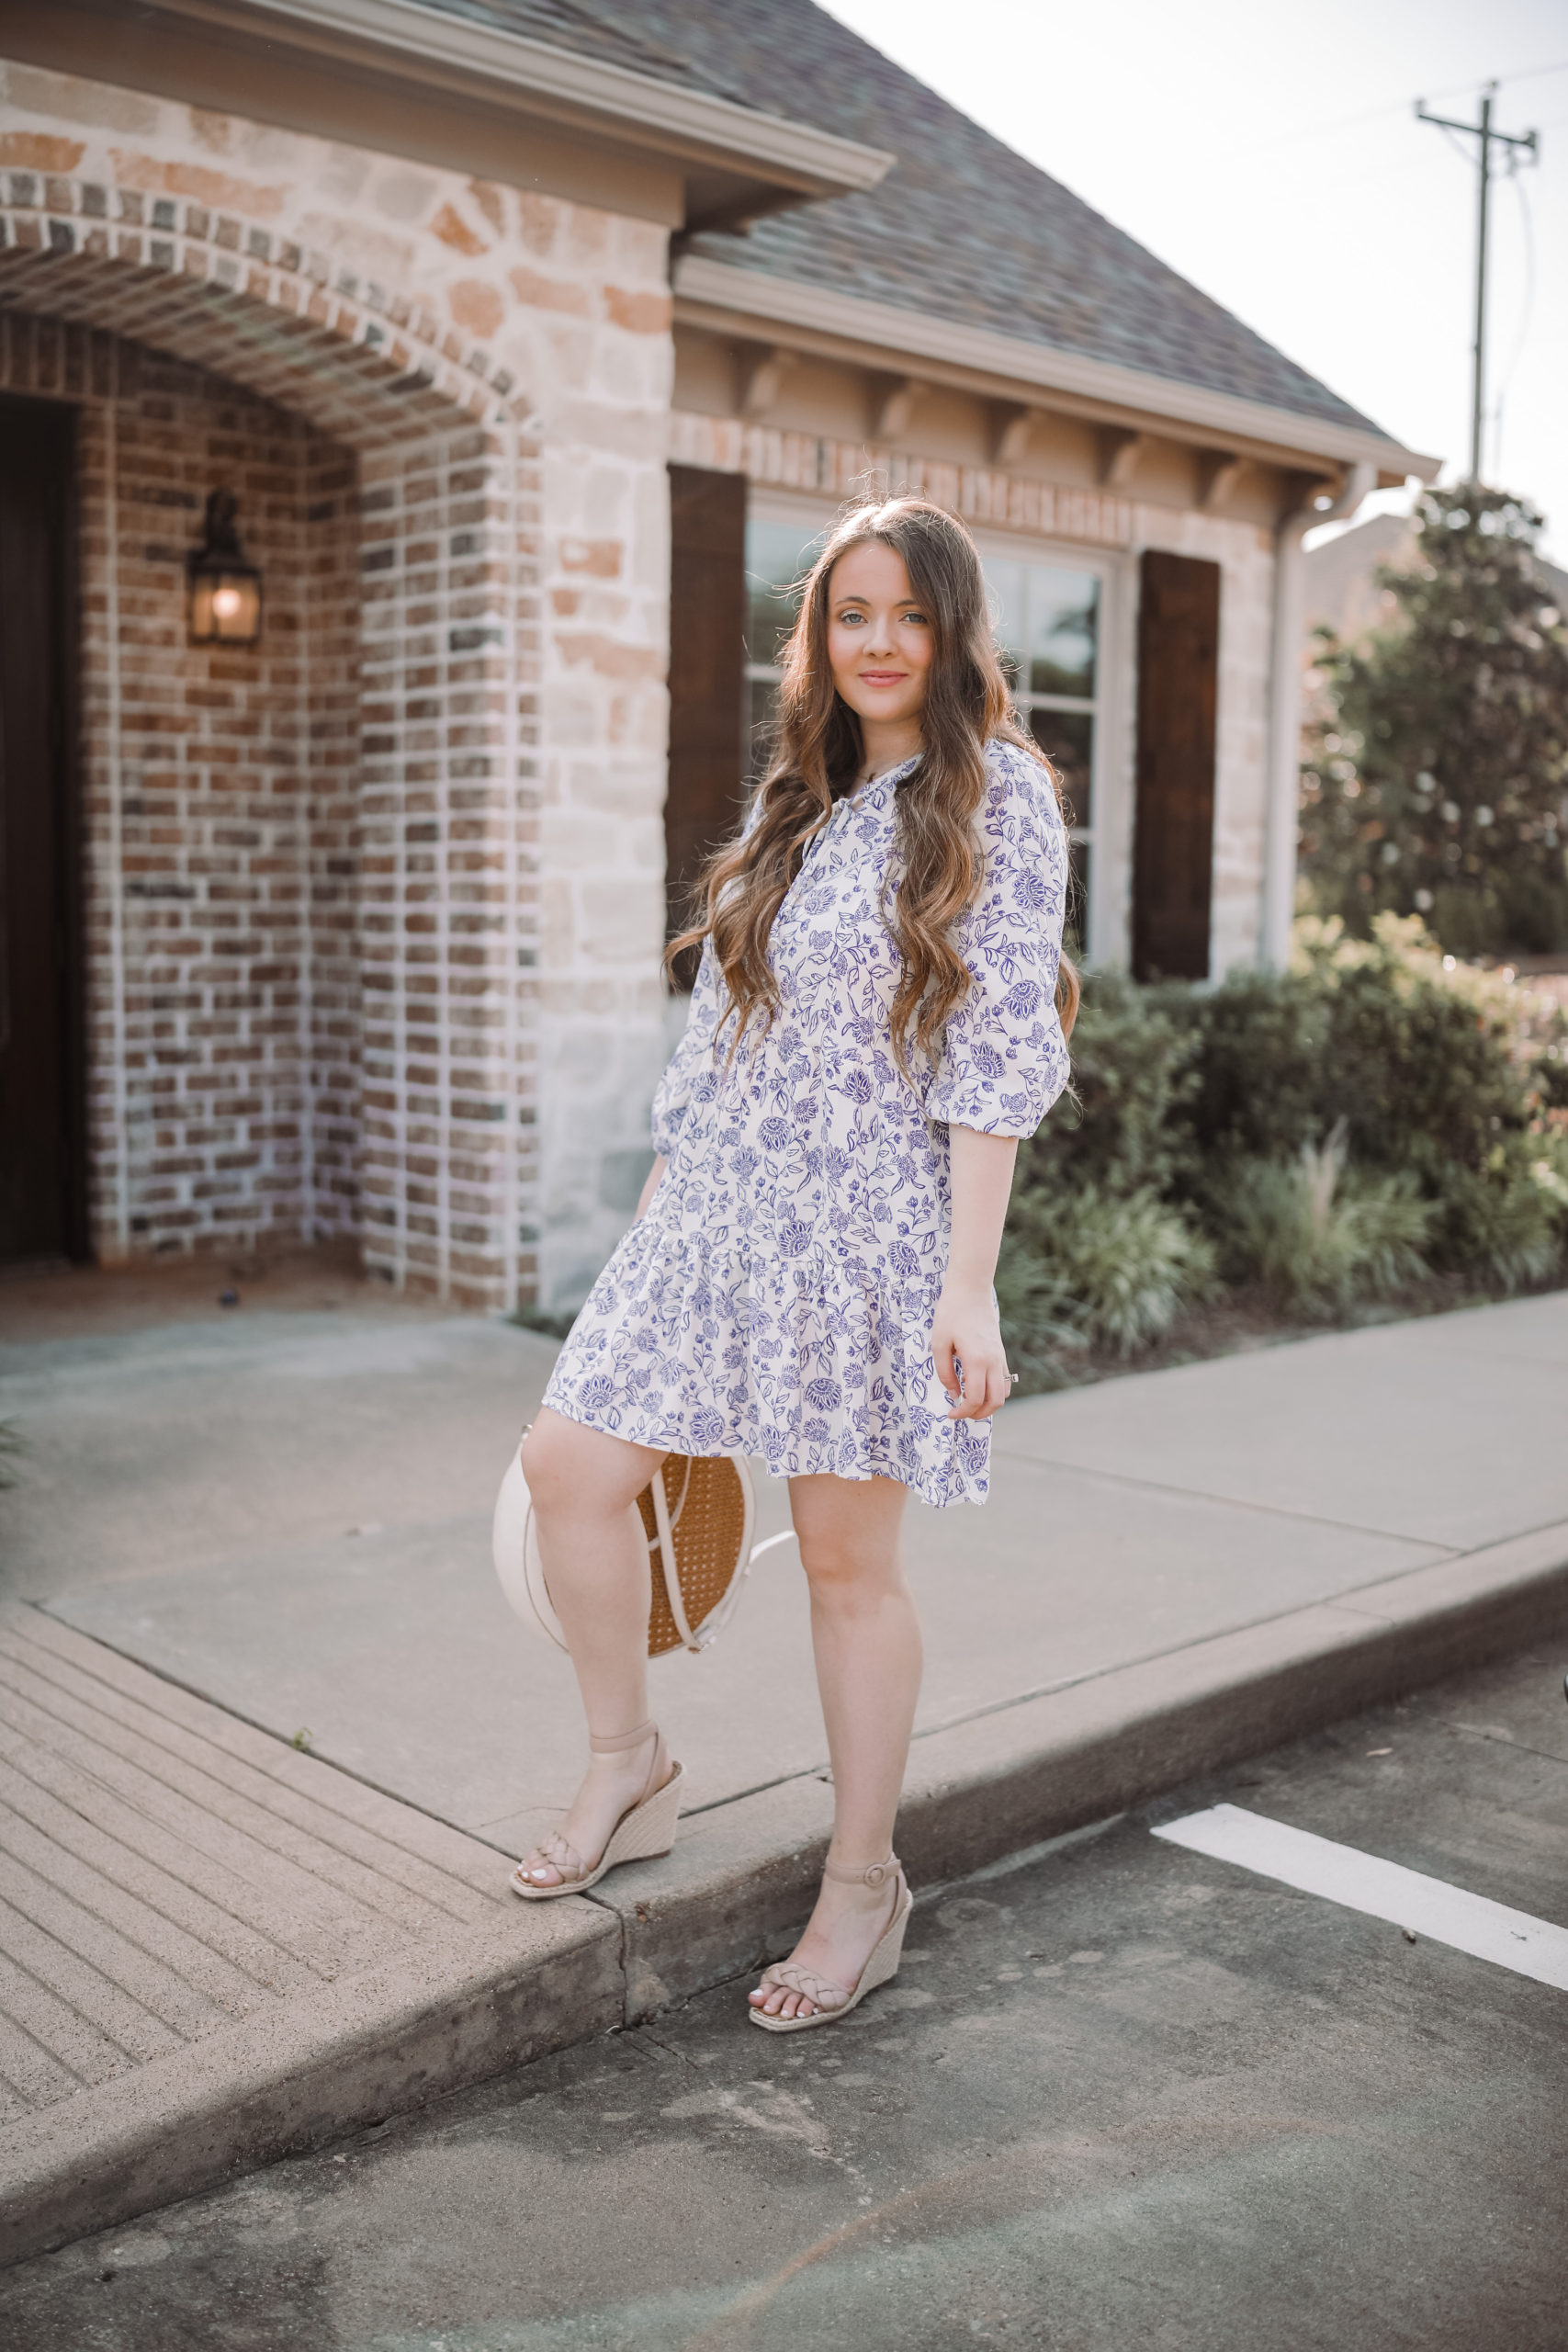 Dainty Floral Dress To Liven Up Your Summer Wardrobe